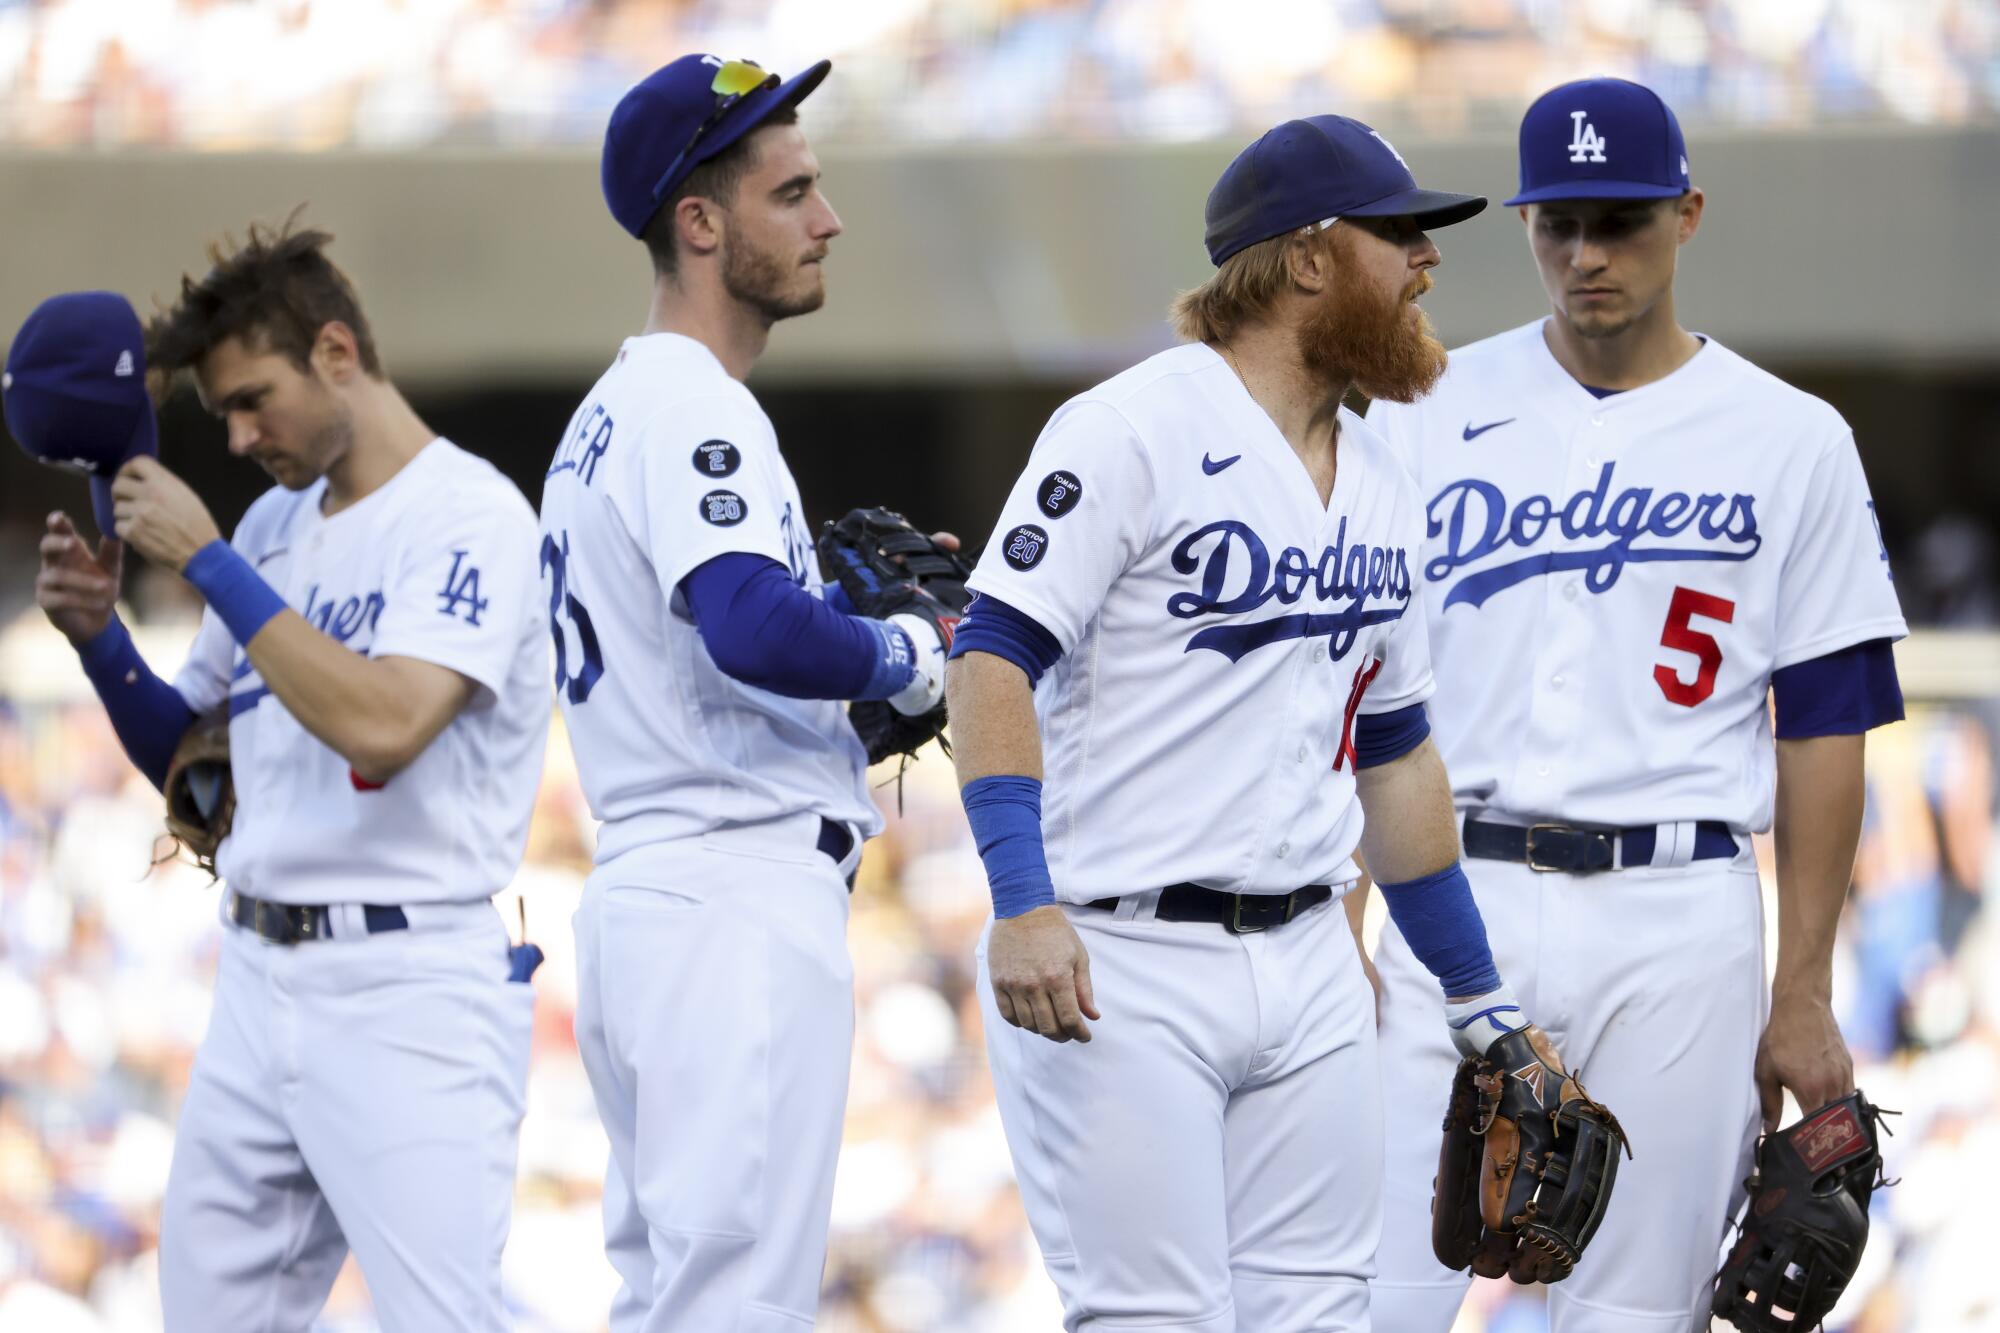 Dodgers players wait during a pitching change during the sixth inning.